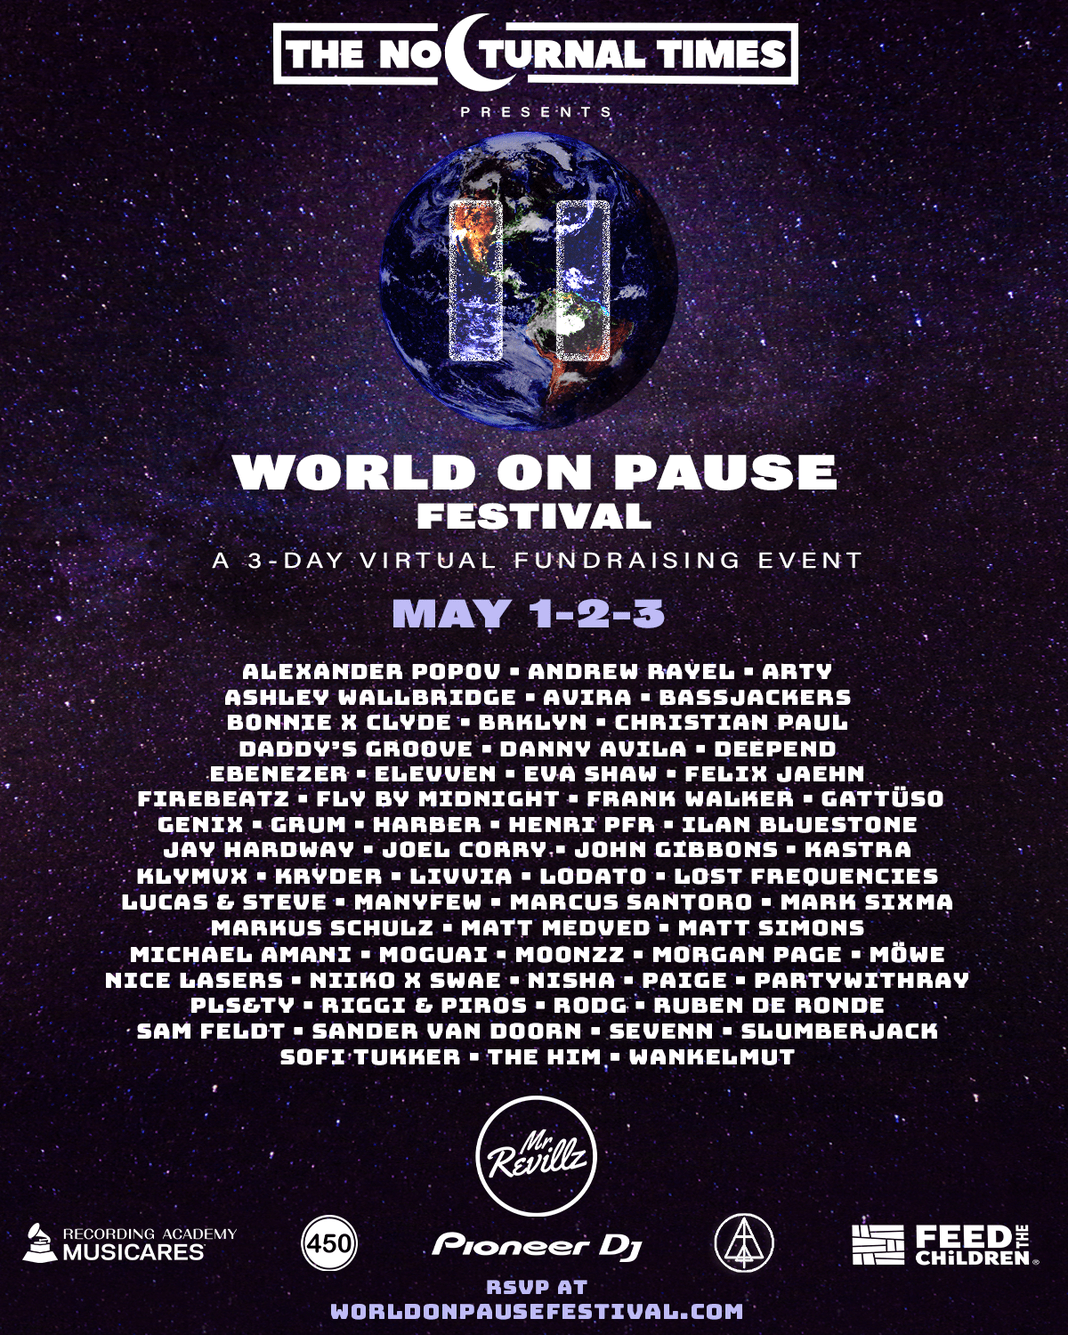 JOIN LOST FREQUENCIES, SOFI TUKKER, MARKUS SCHULZ AND MORE FOR 3 DAY VIRTUAL FESTIVAL "WORLD ON PAUSE"